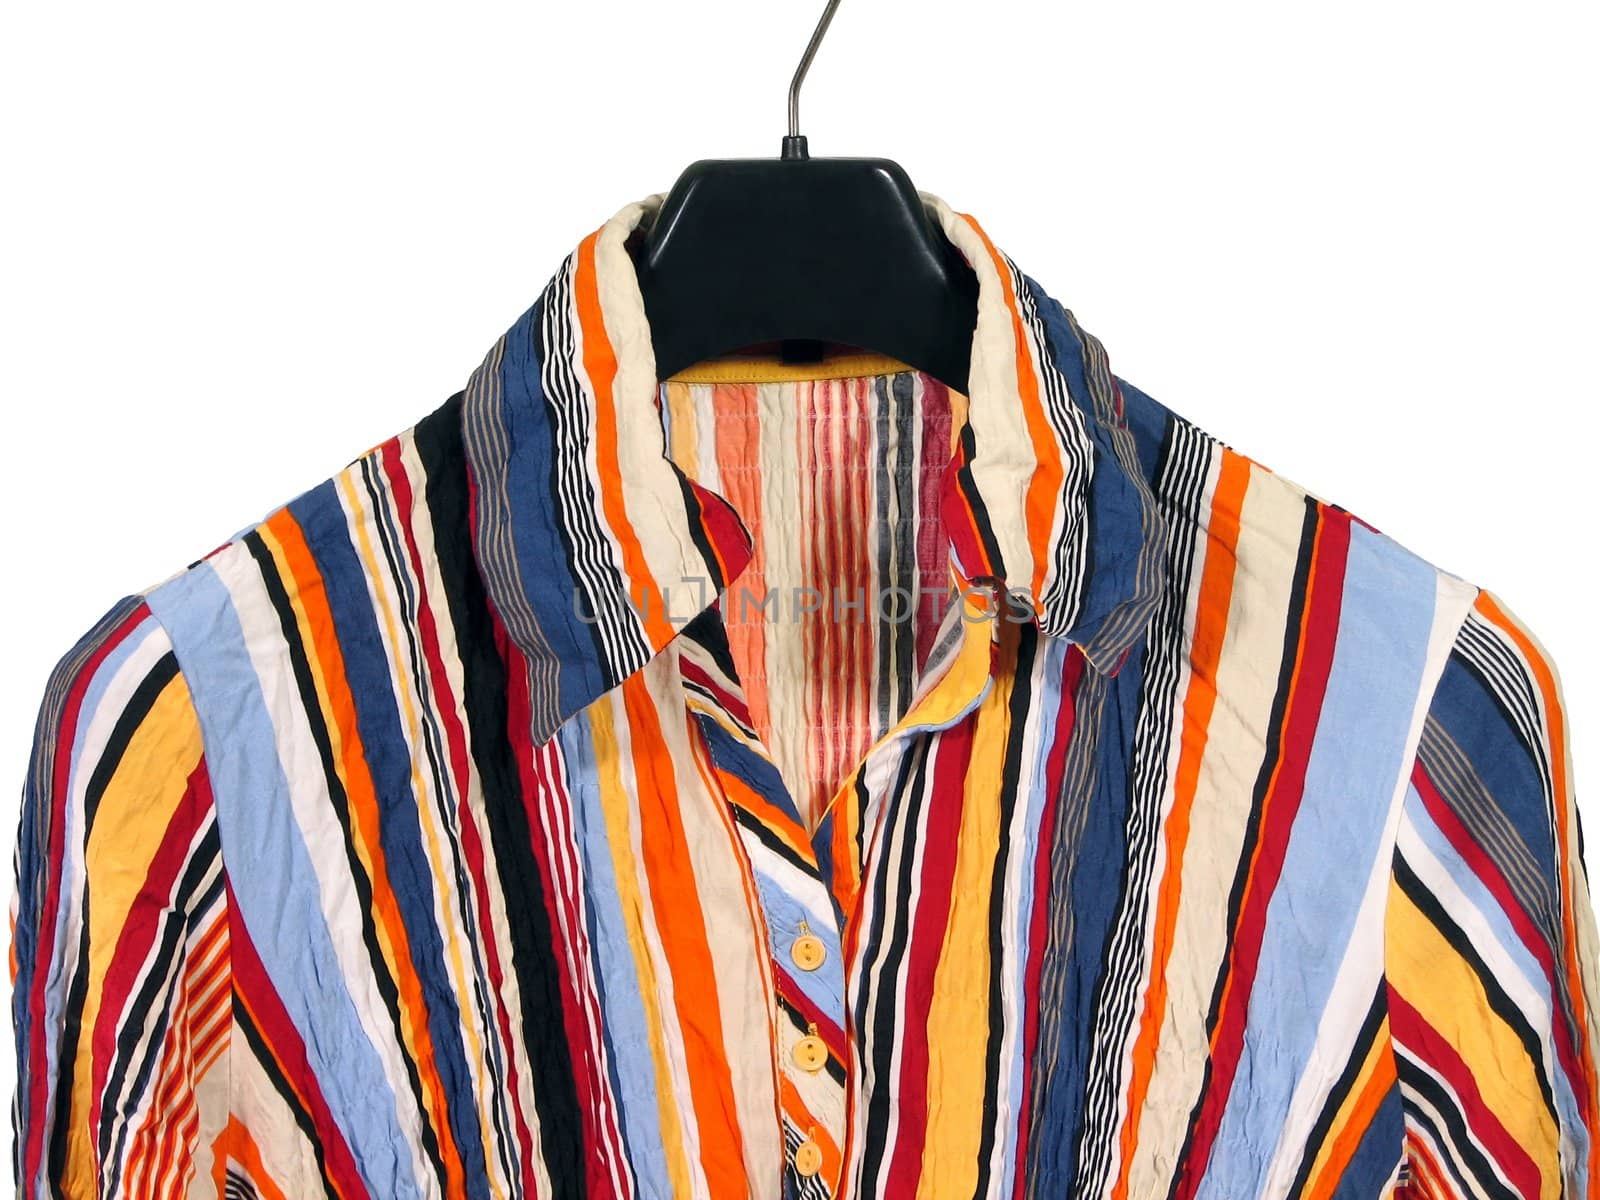 Colorful striped shirt on white background by anikasalsera